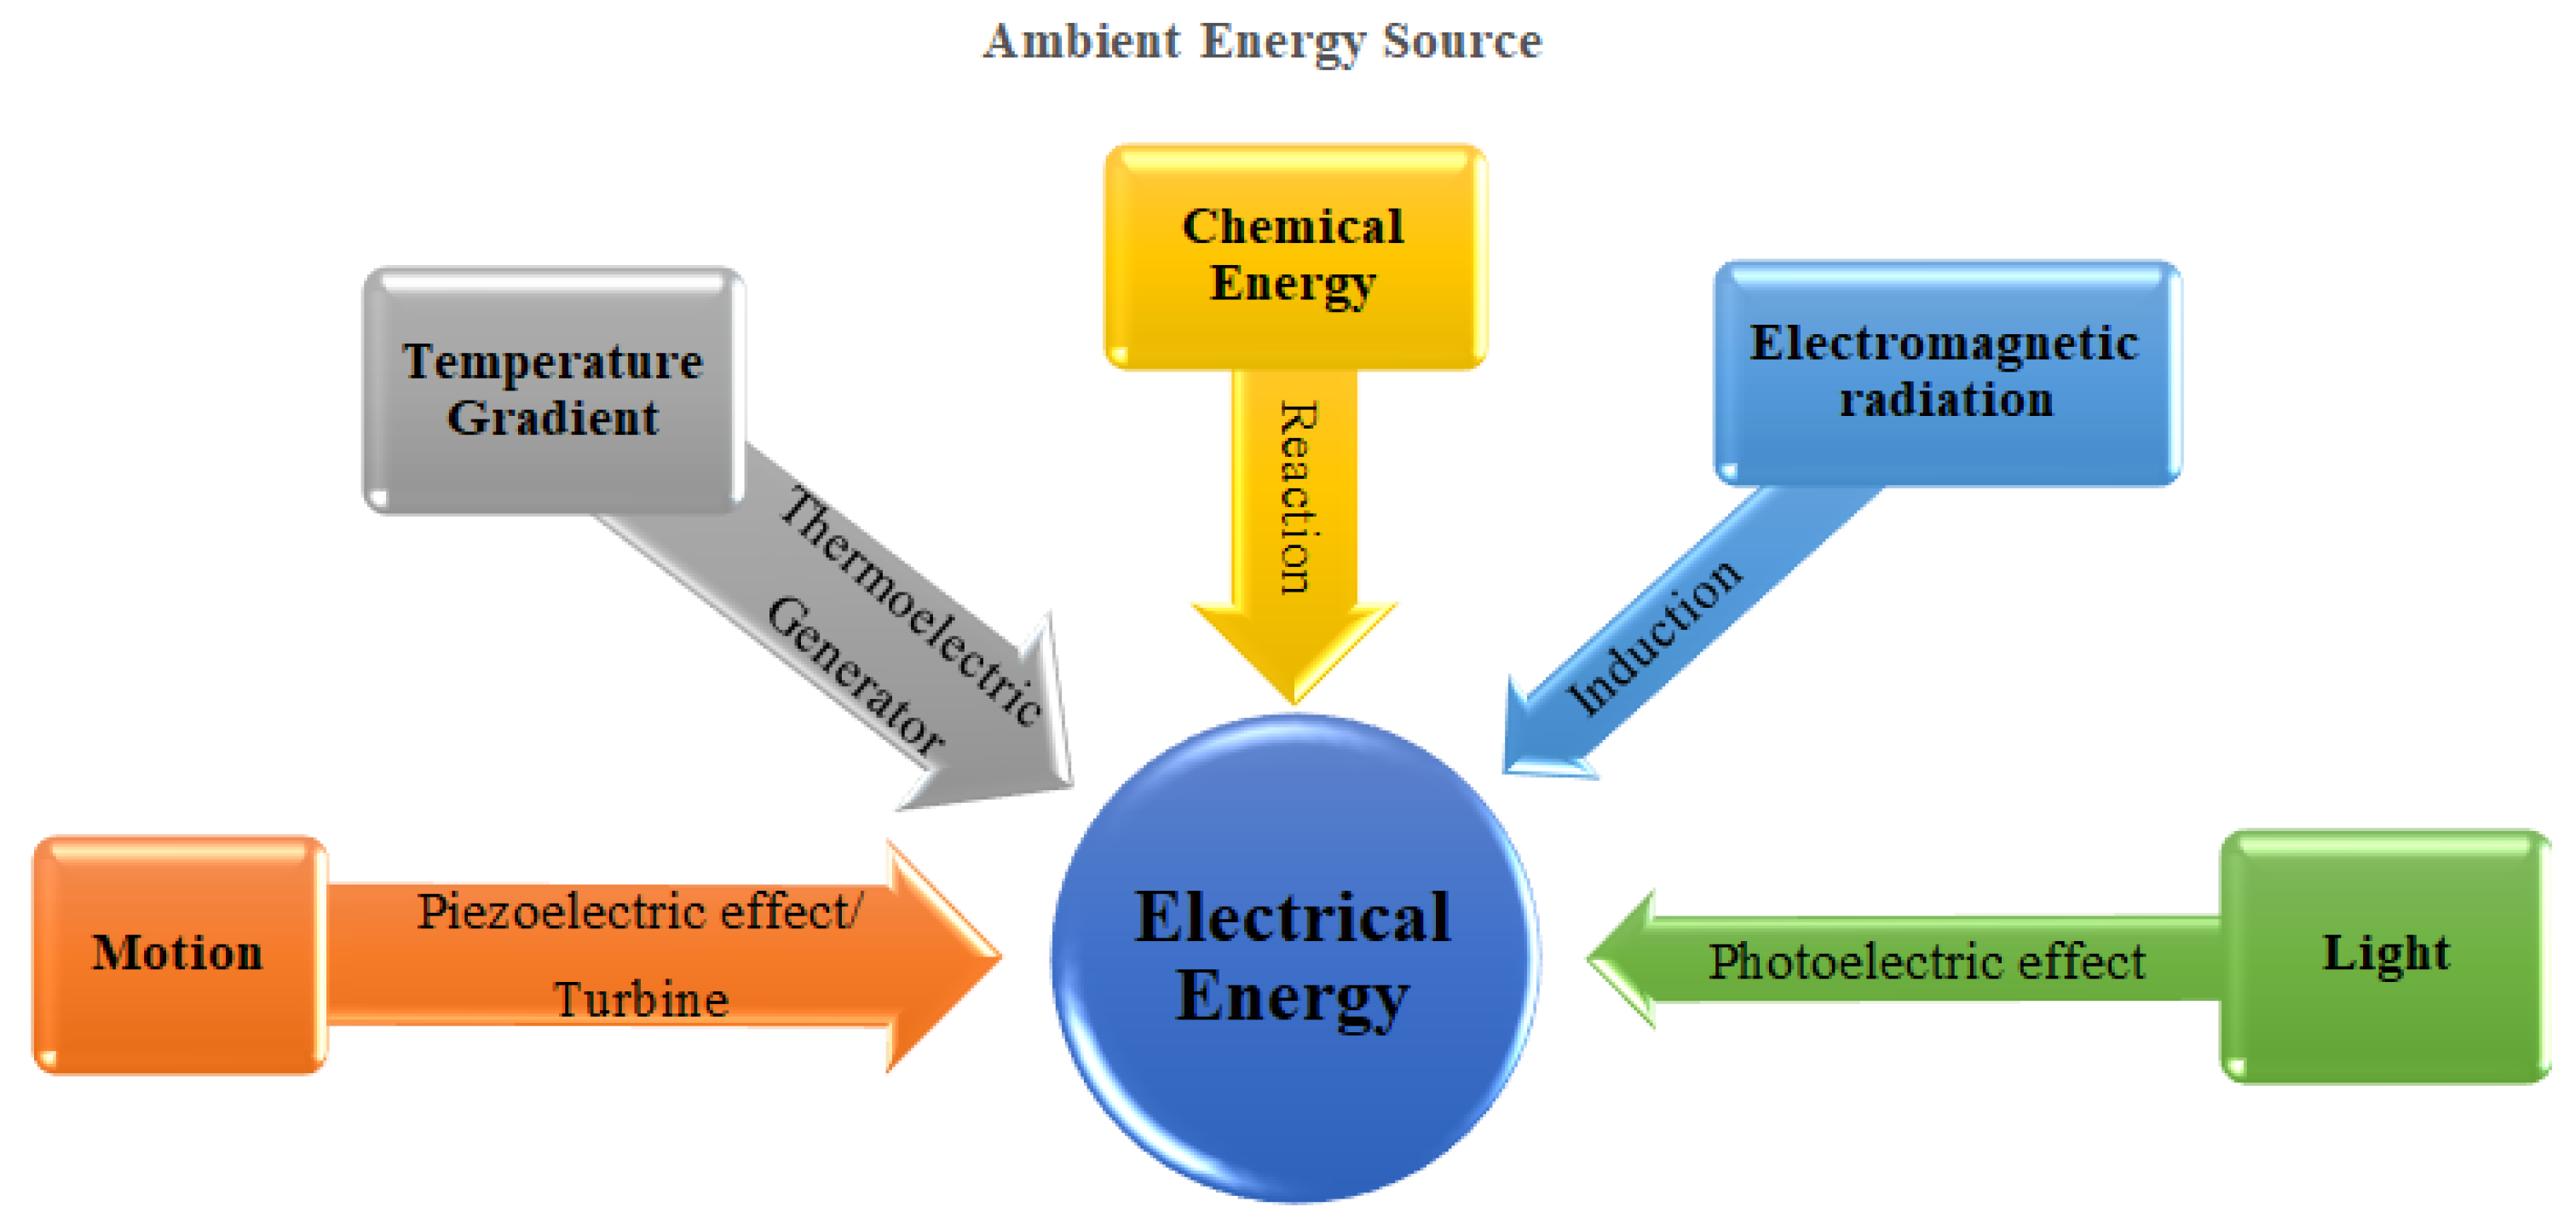 https://www.mdpi.com/electricity/electricity-02-00022/article_deploy/html/images/electricity-02-00022-g001.png